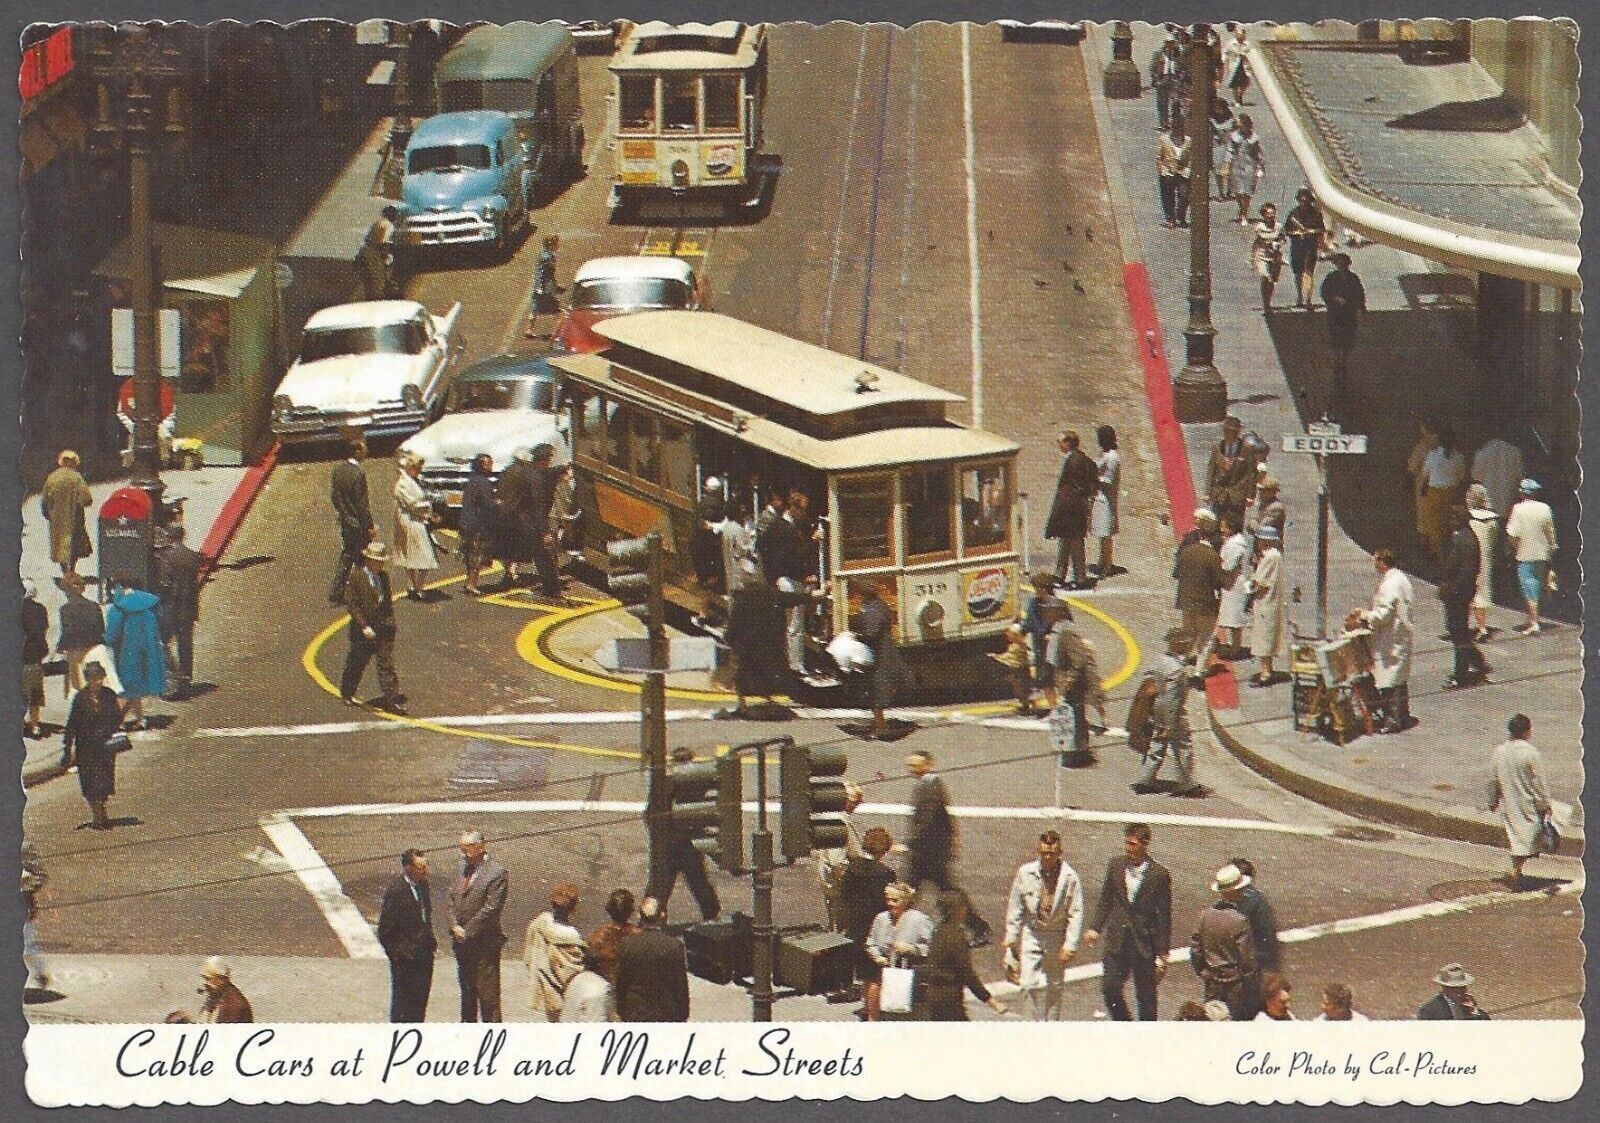 CABLE CARS POWELL & MARKET STREETS Postcard Scalloped Edge Street Scene People